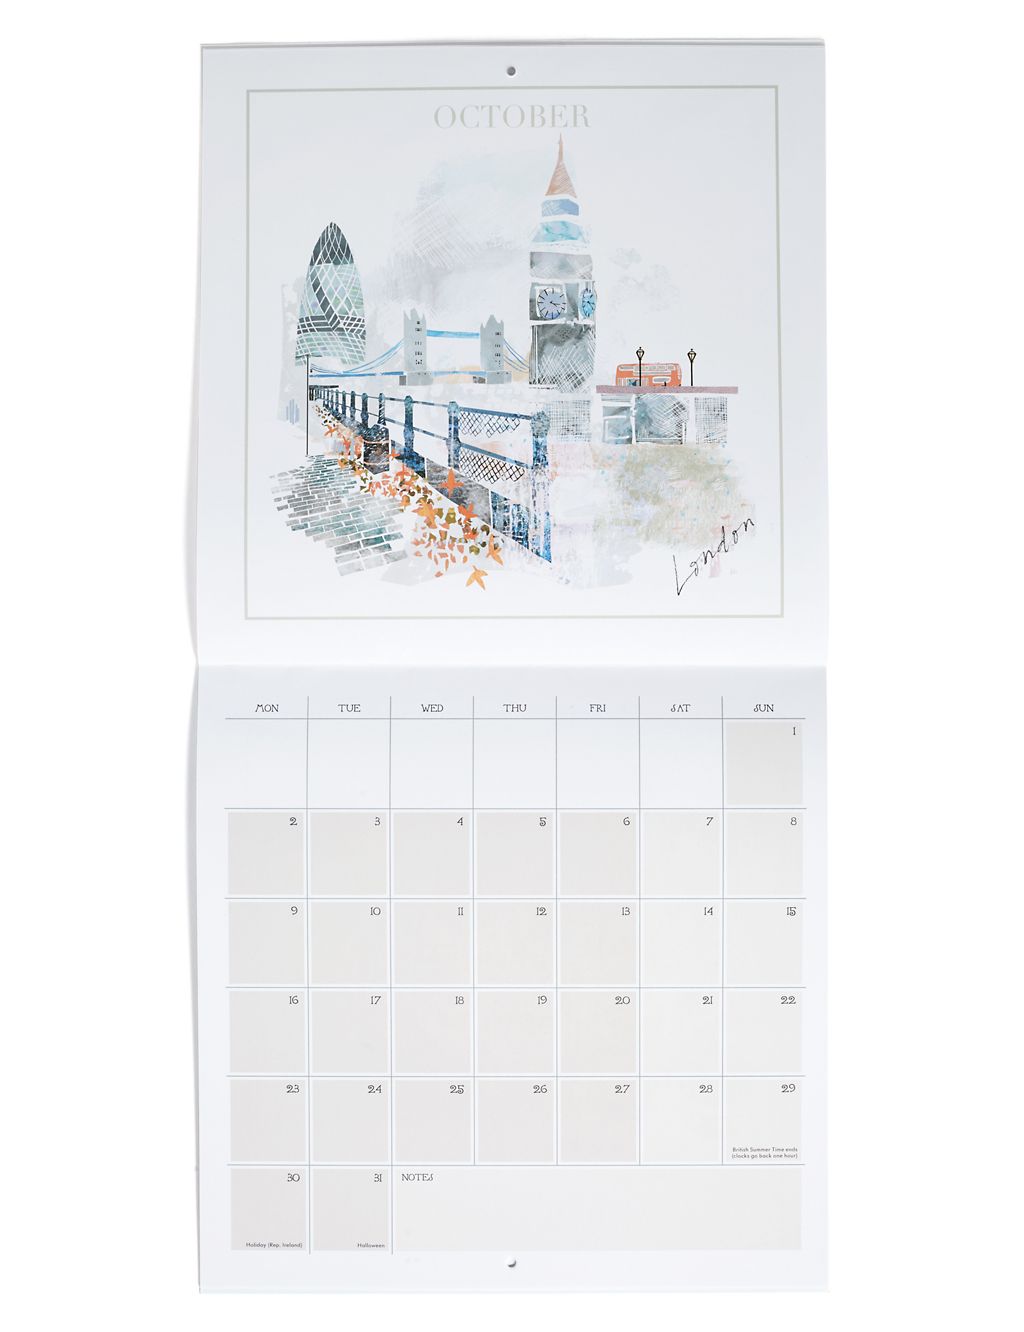 Illustrated Cities Calendar 2 of 4